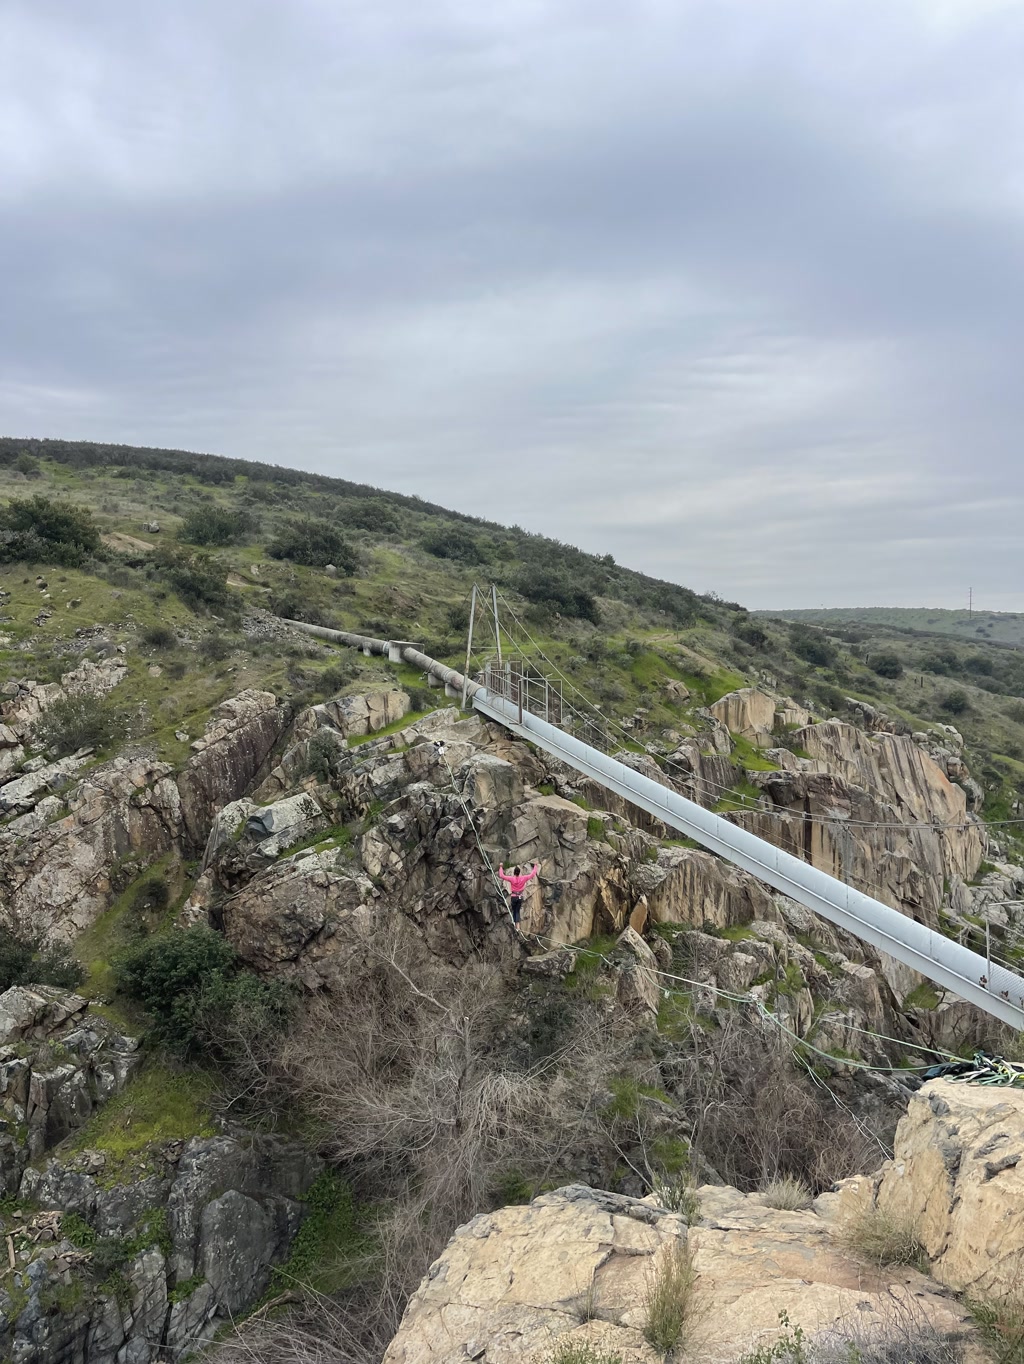 A suspension bridge spans across a rugged terrain of steep, weathered rocks and sparse greenery. Below the bridge, a person wearing bright pink is seen mid-climb on the rocky cliff face, adding a pop of color to the natural landscape. Overcast skies loom above, and no text is visible in the scene.